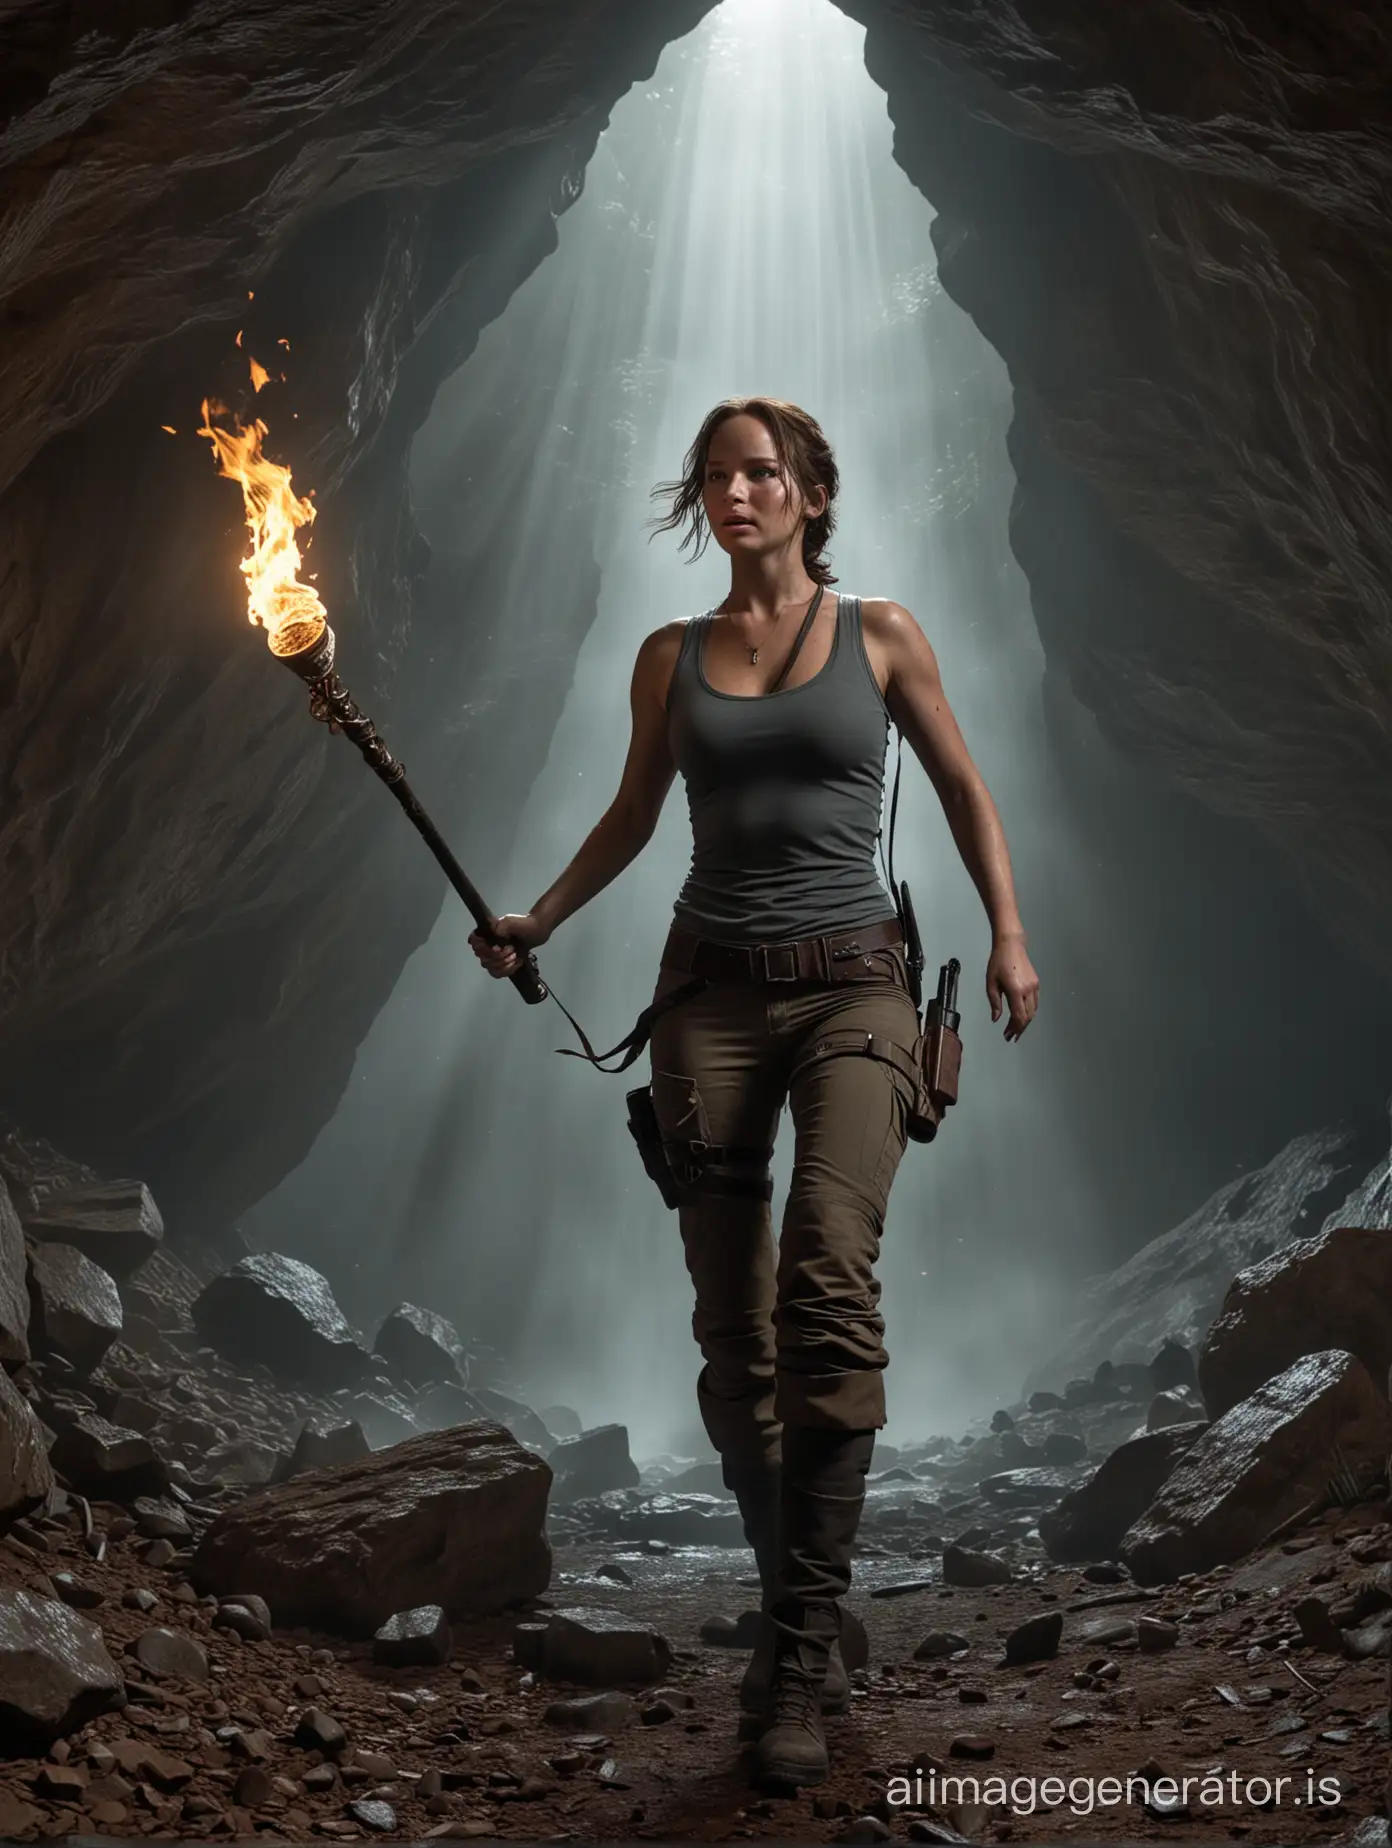 Jennifer Lawrence is playing Lara Croft in a cave holding a torch.